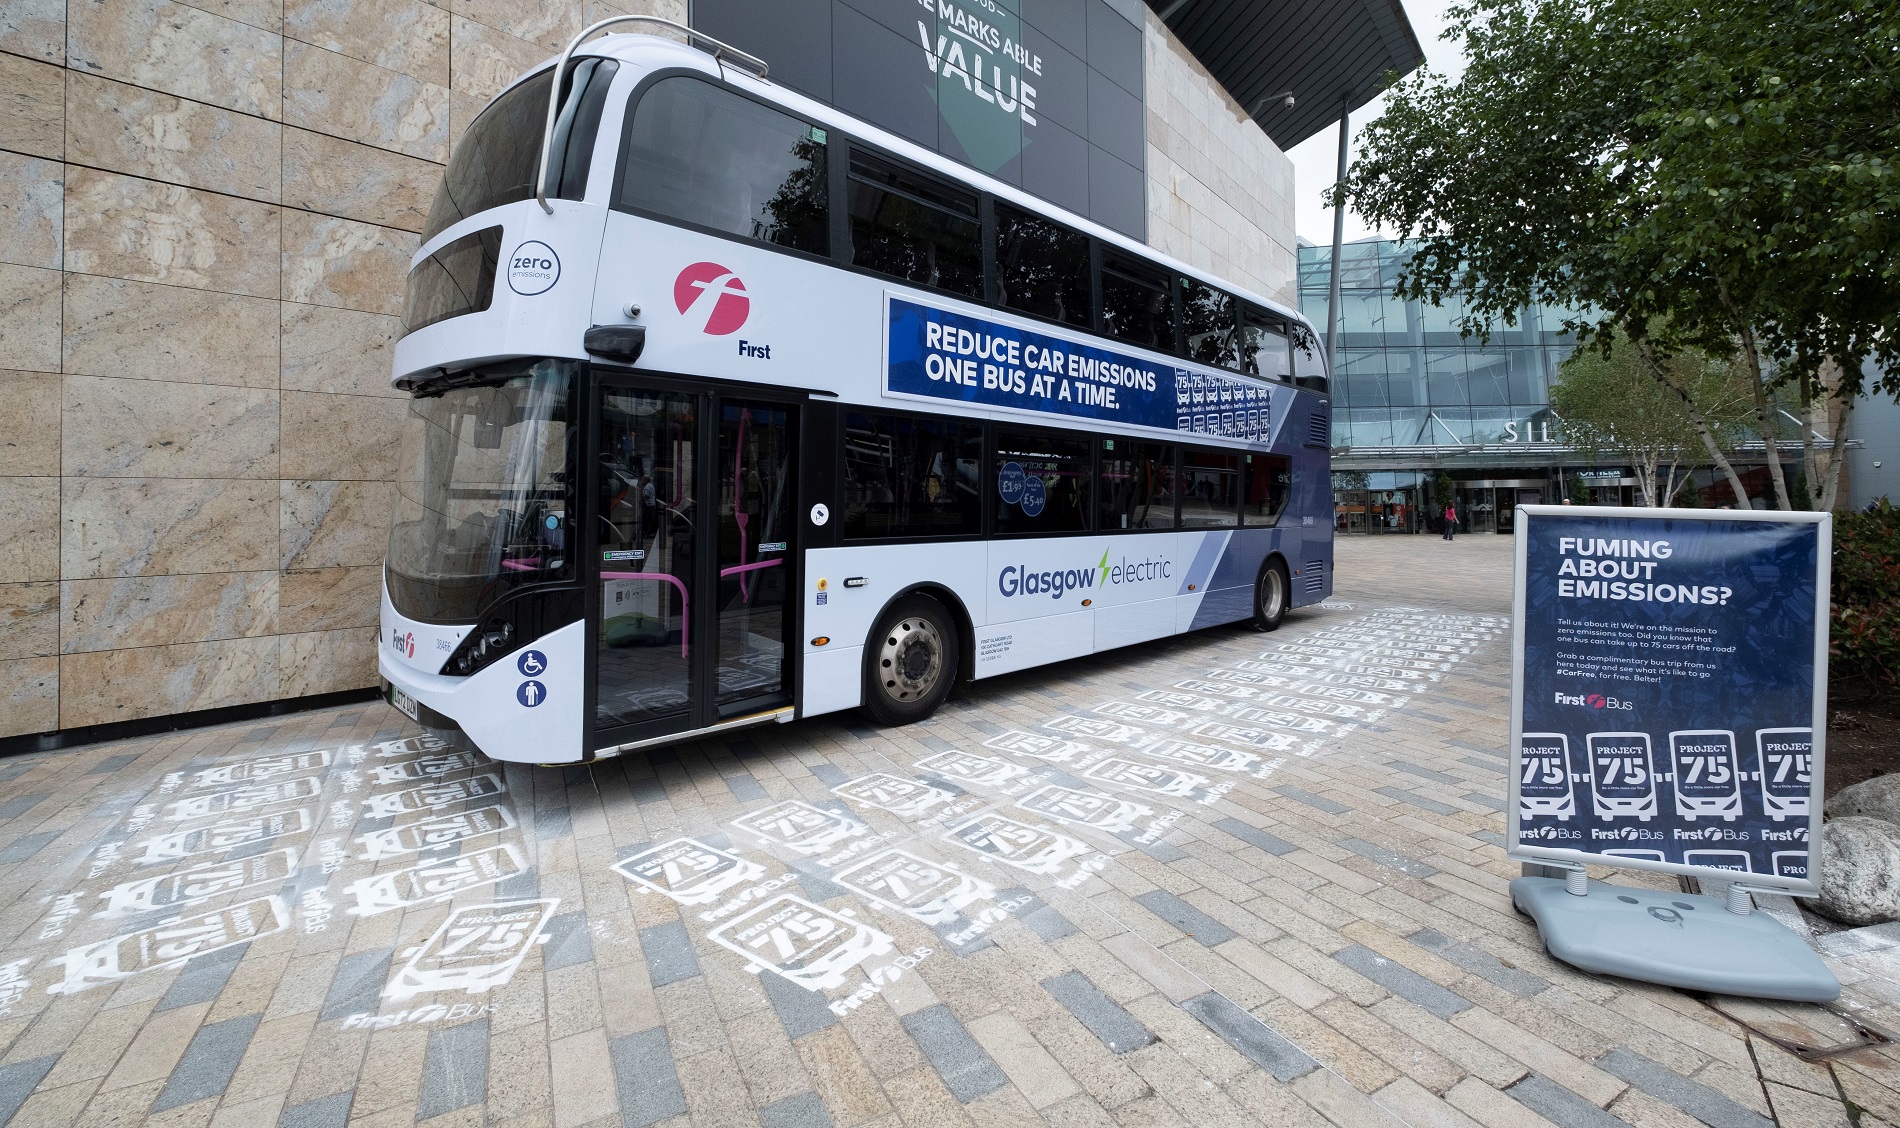 First promotes modal shift at Glasgow shopping centre